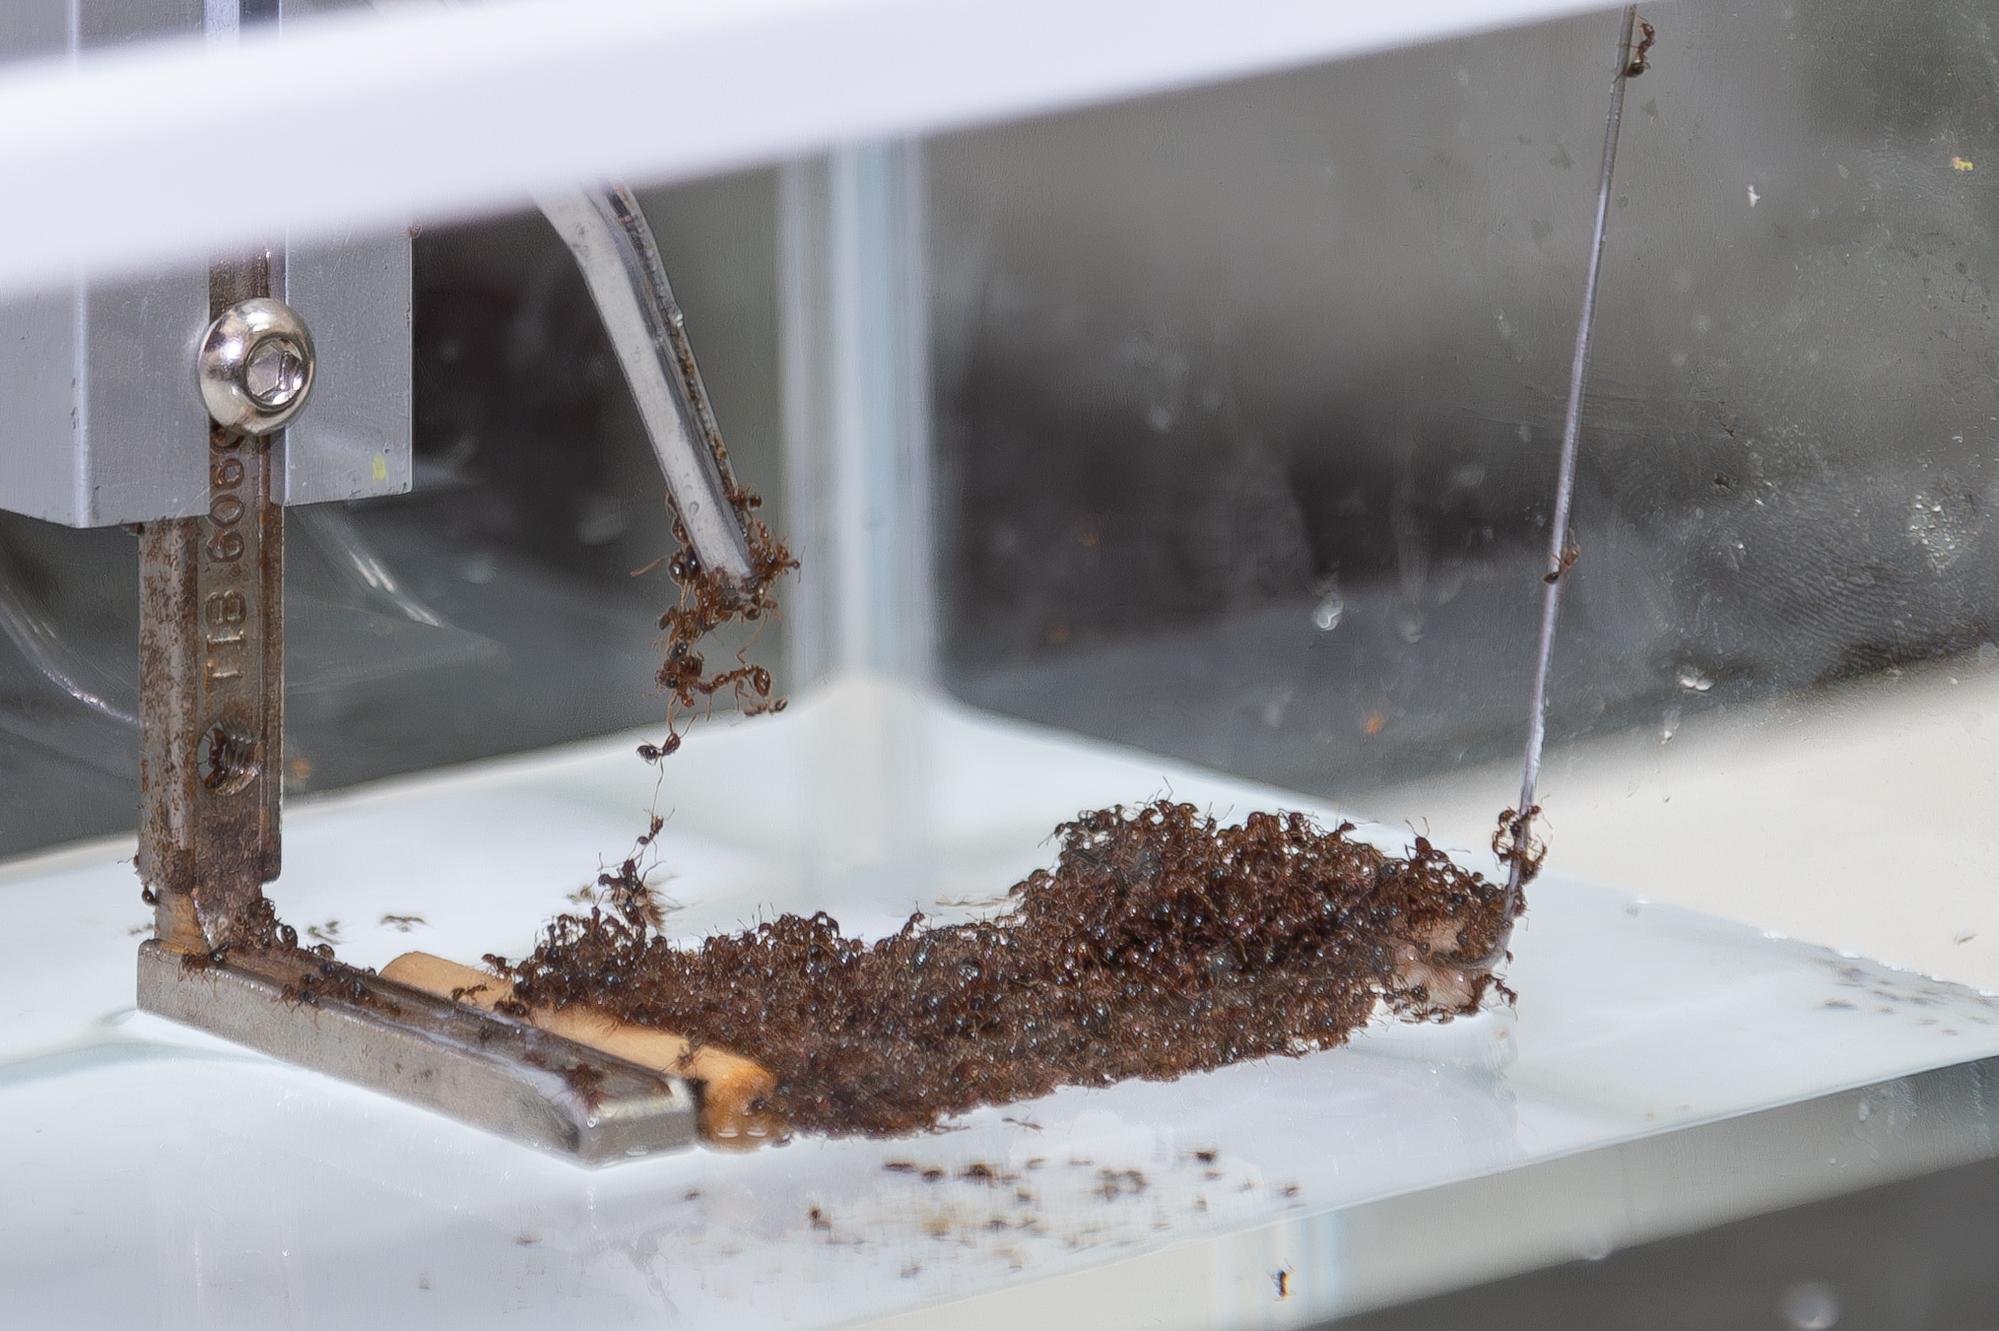 The research team at NTHU found that fire ant rafts do not become narrower or thinner when stretched.